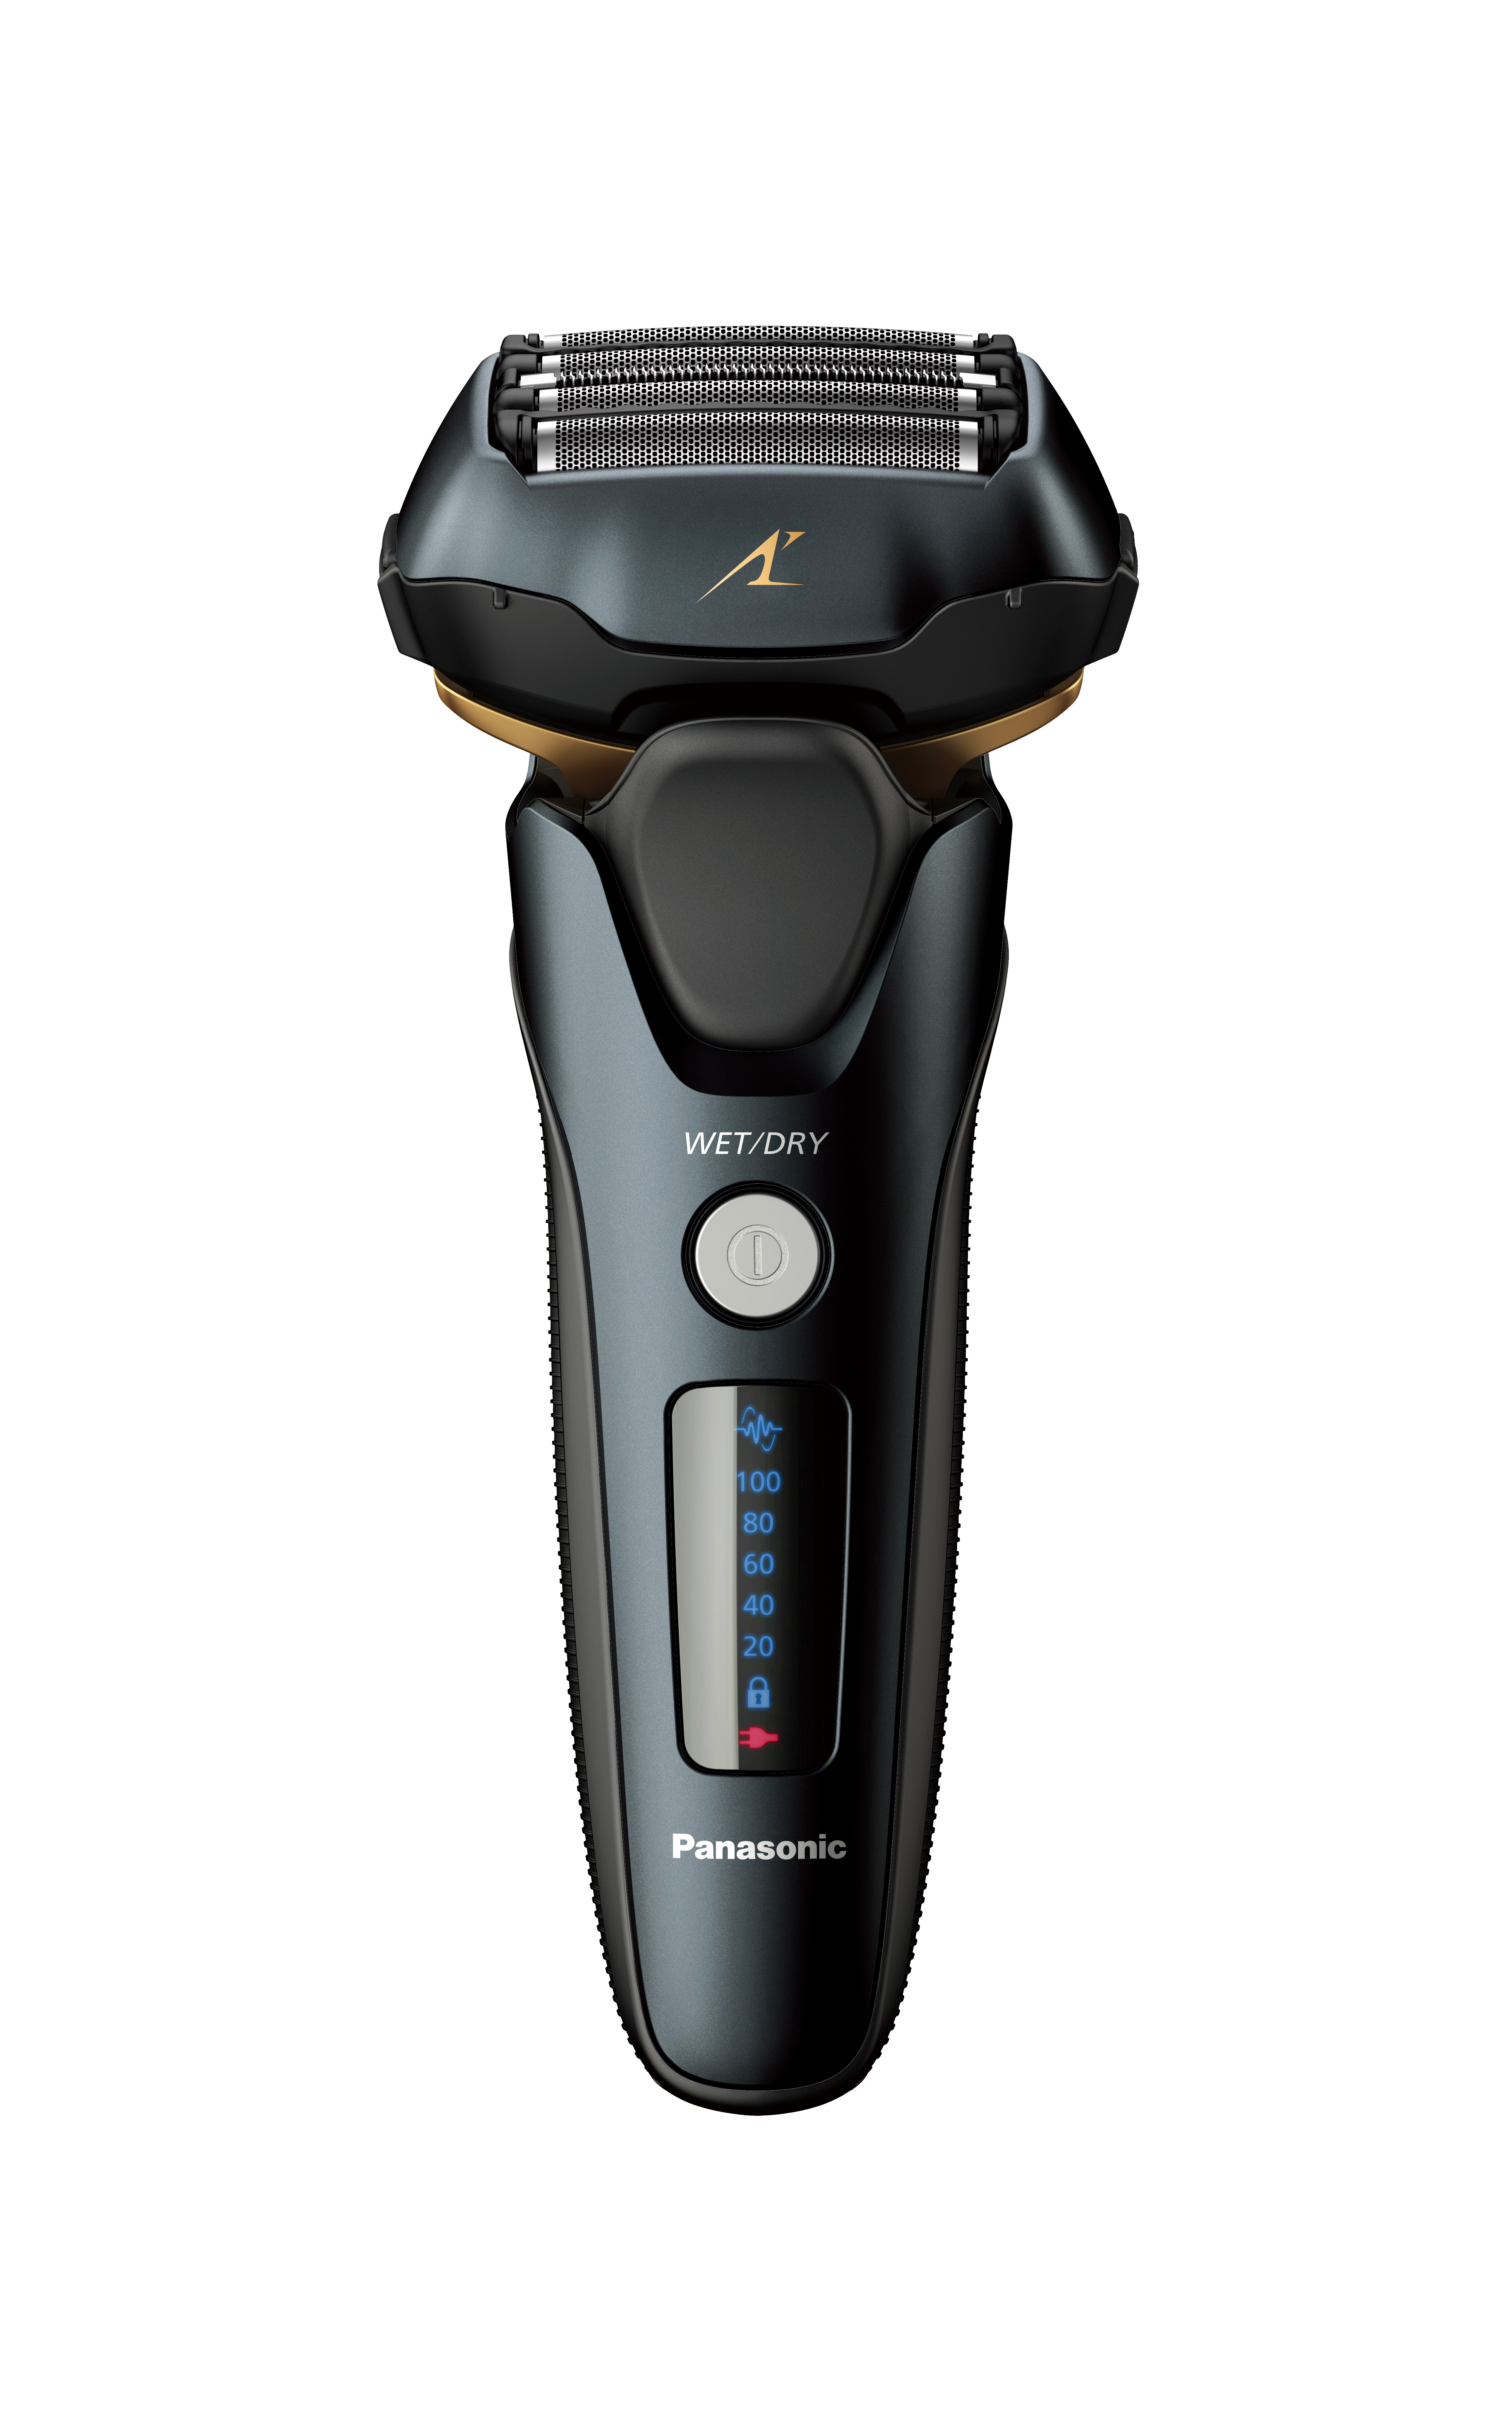 Panasonic: $80 Off Arc5 Wet/Dry Electric Shaver (Matte Black) $119.99 + Free Shipping